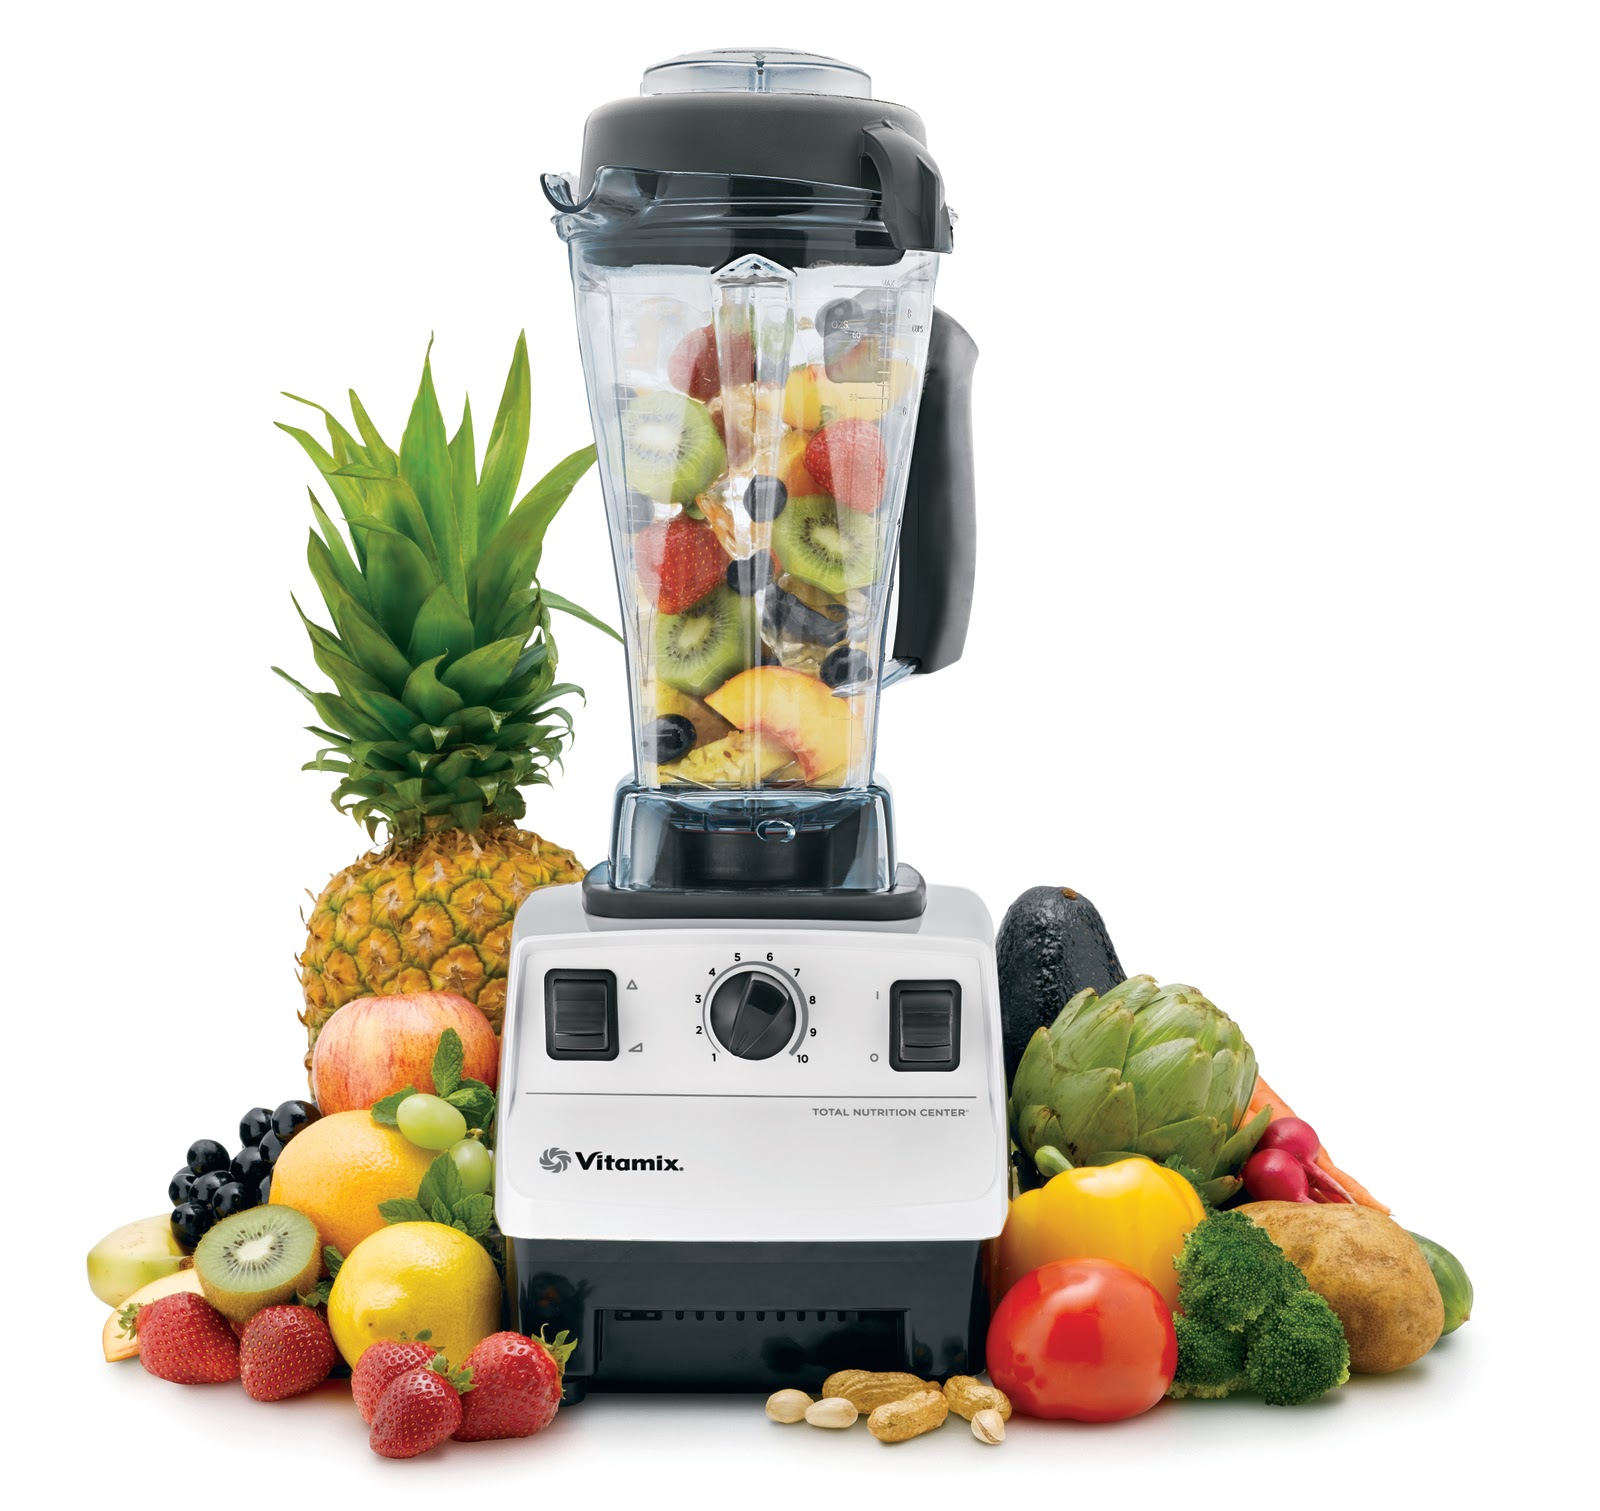 How Much Horsepower Does A Vitamix 5200 Have? The Strength and Speed of ...